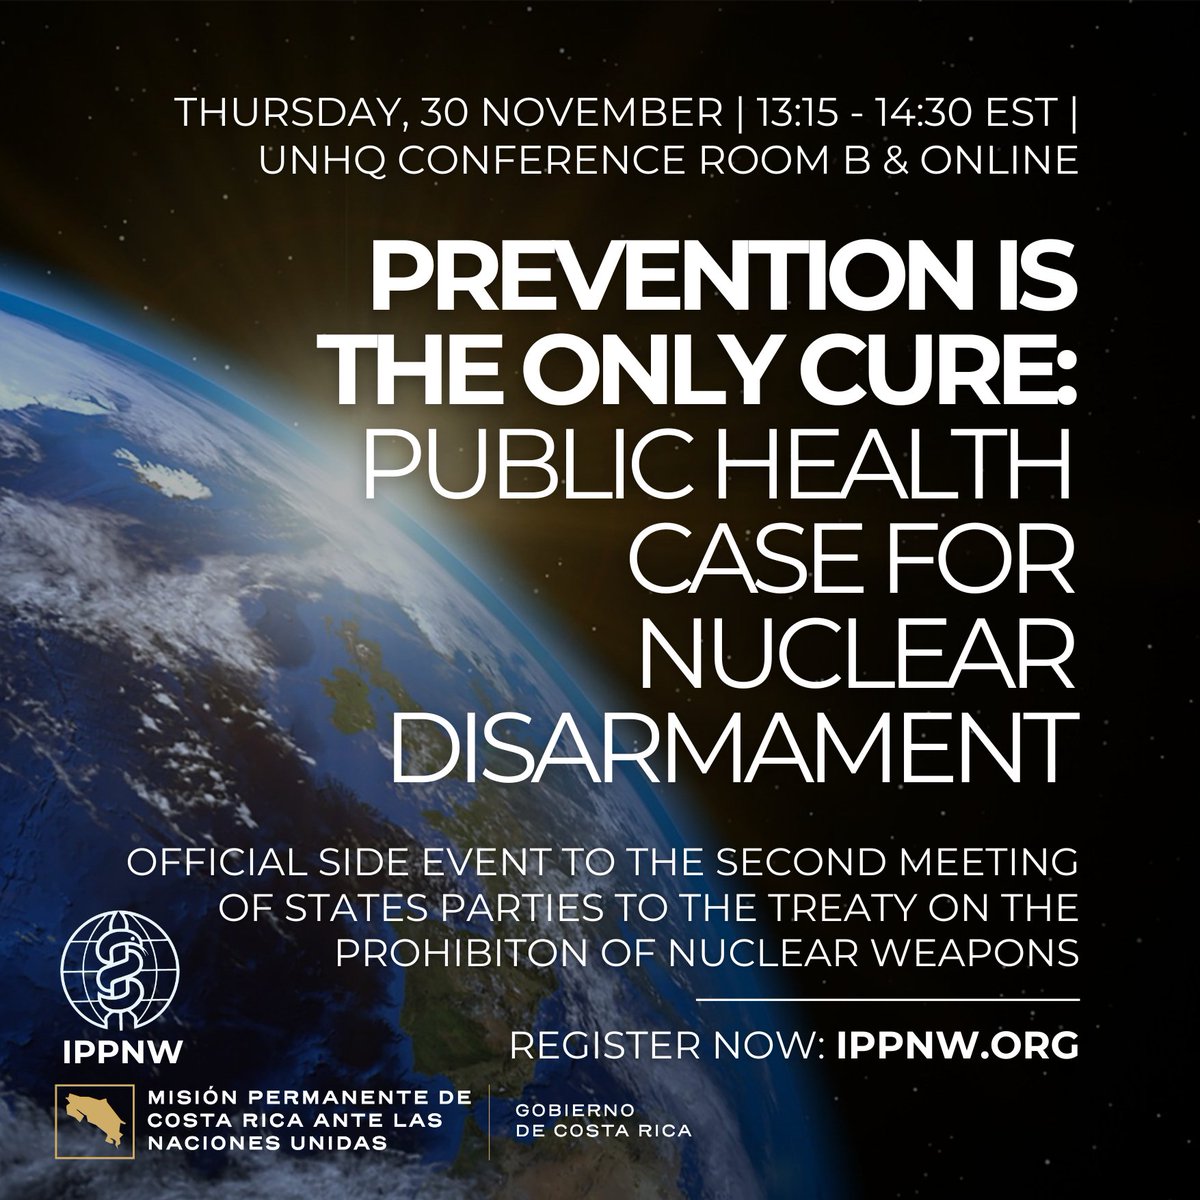 Looking forward to speaking today at the Prevention is the Only Cure event hosted by @IPPNW and Costa Rica. @MichelleAcornDr @ICNurses #NotATarget #nursesforpeace Find the registration below: